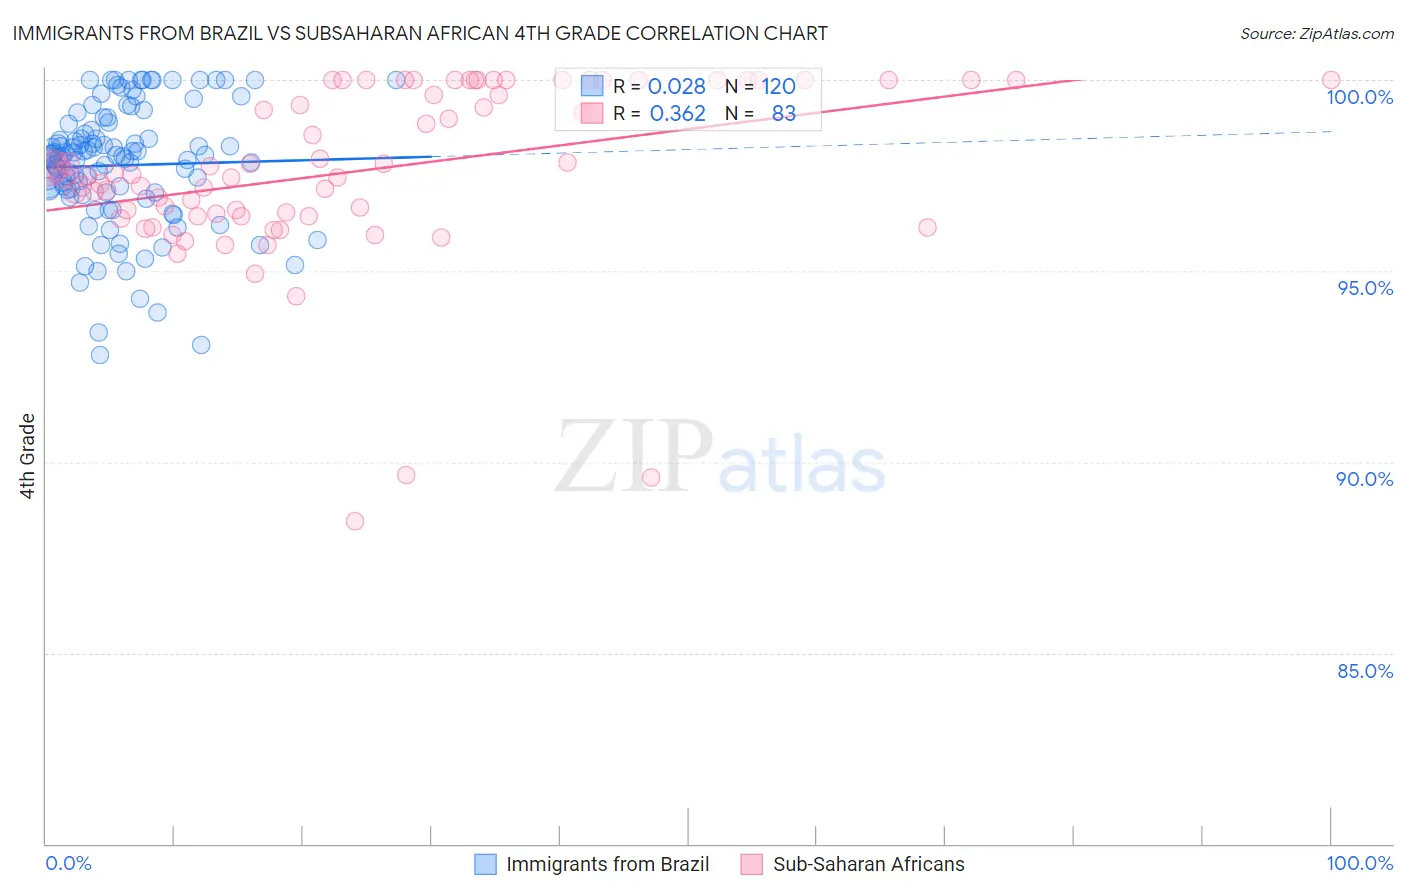 Immigrants from Brazil vs Subsaharan African 4th Grade